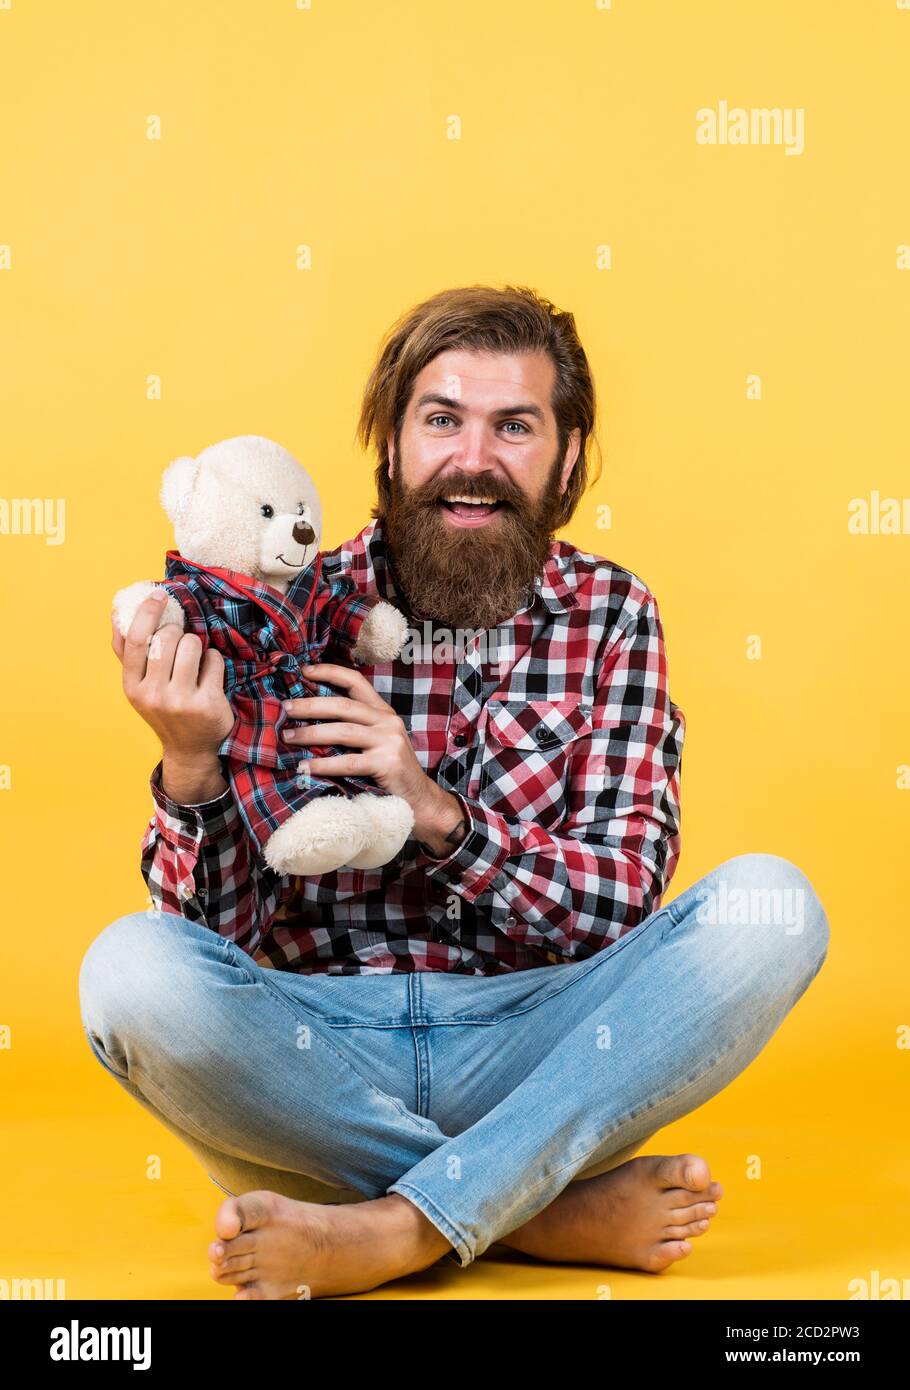 best present ever. Valentines day gift for beloved. Holiday celebration concept. Guy with happy face plays with soft toy. Childish mood concept. guy enjoy valentines day. Holiday celebration. Stock Photo